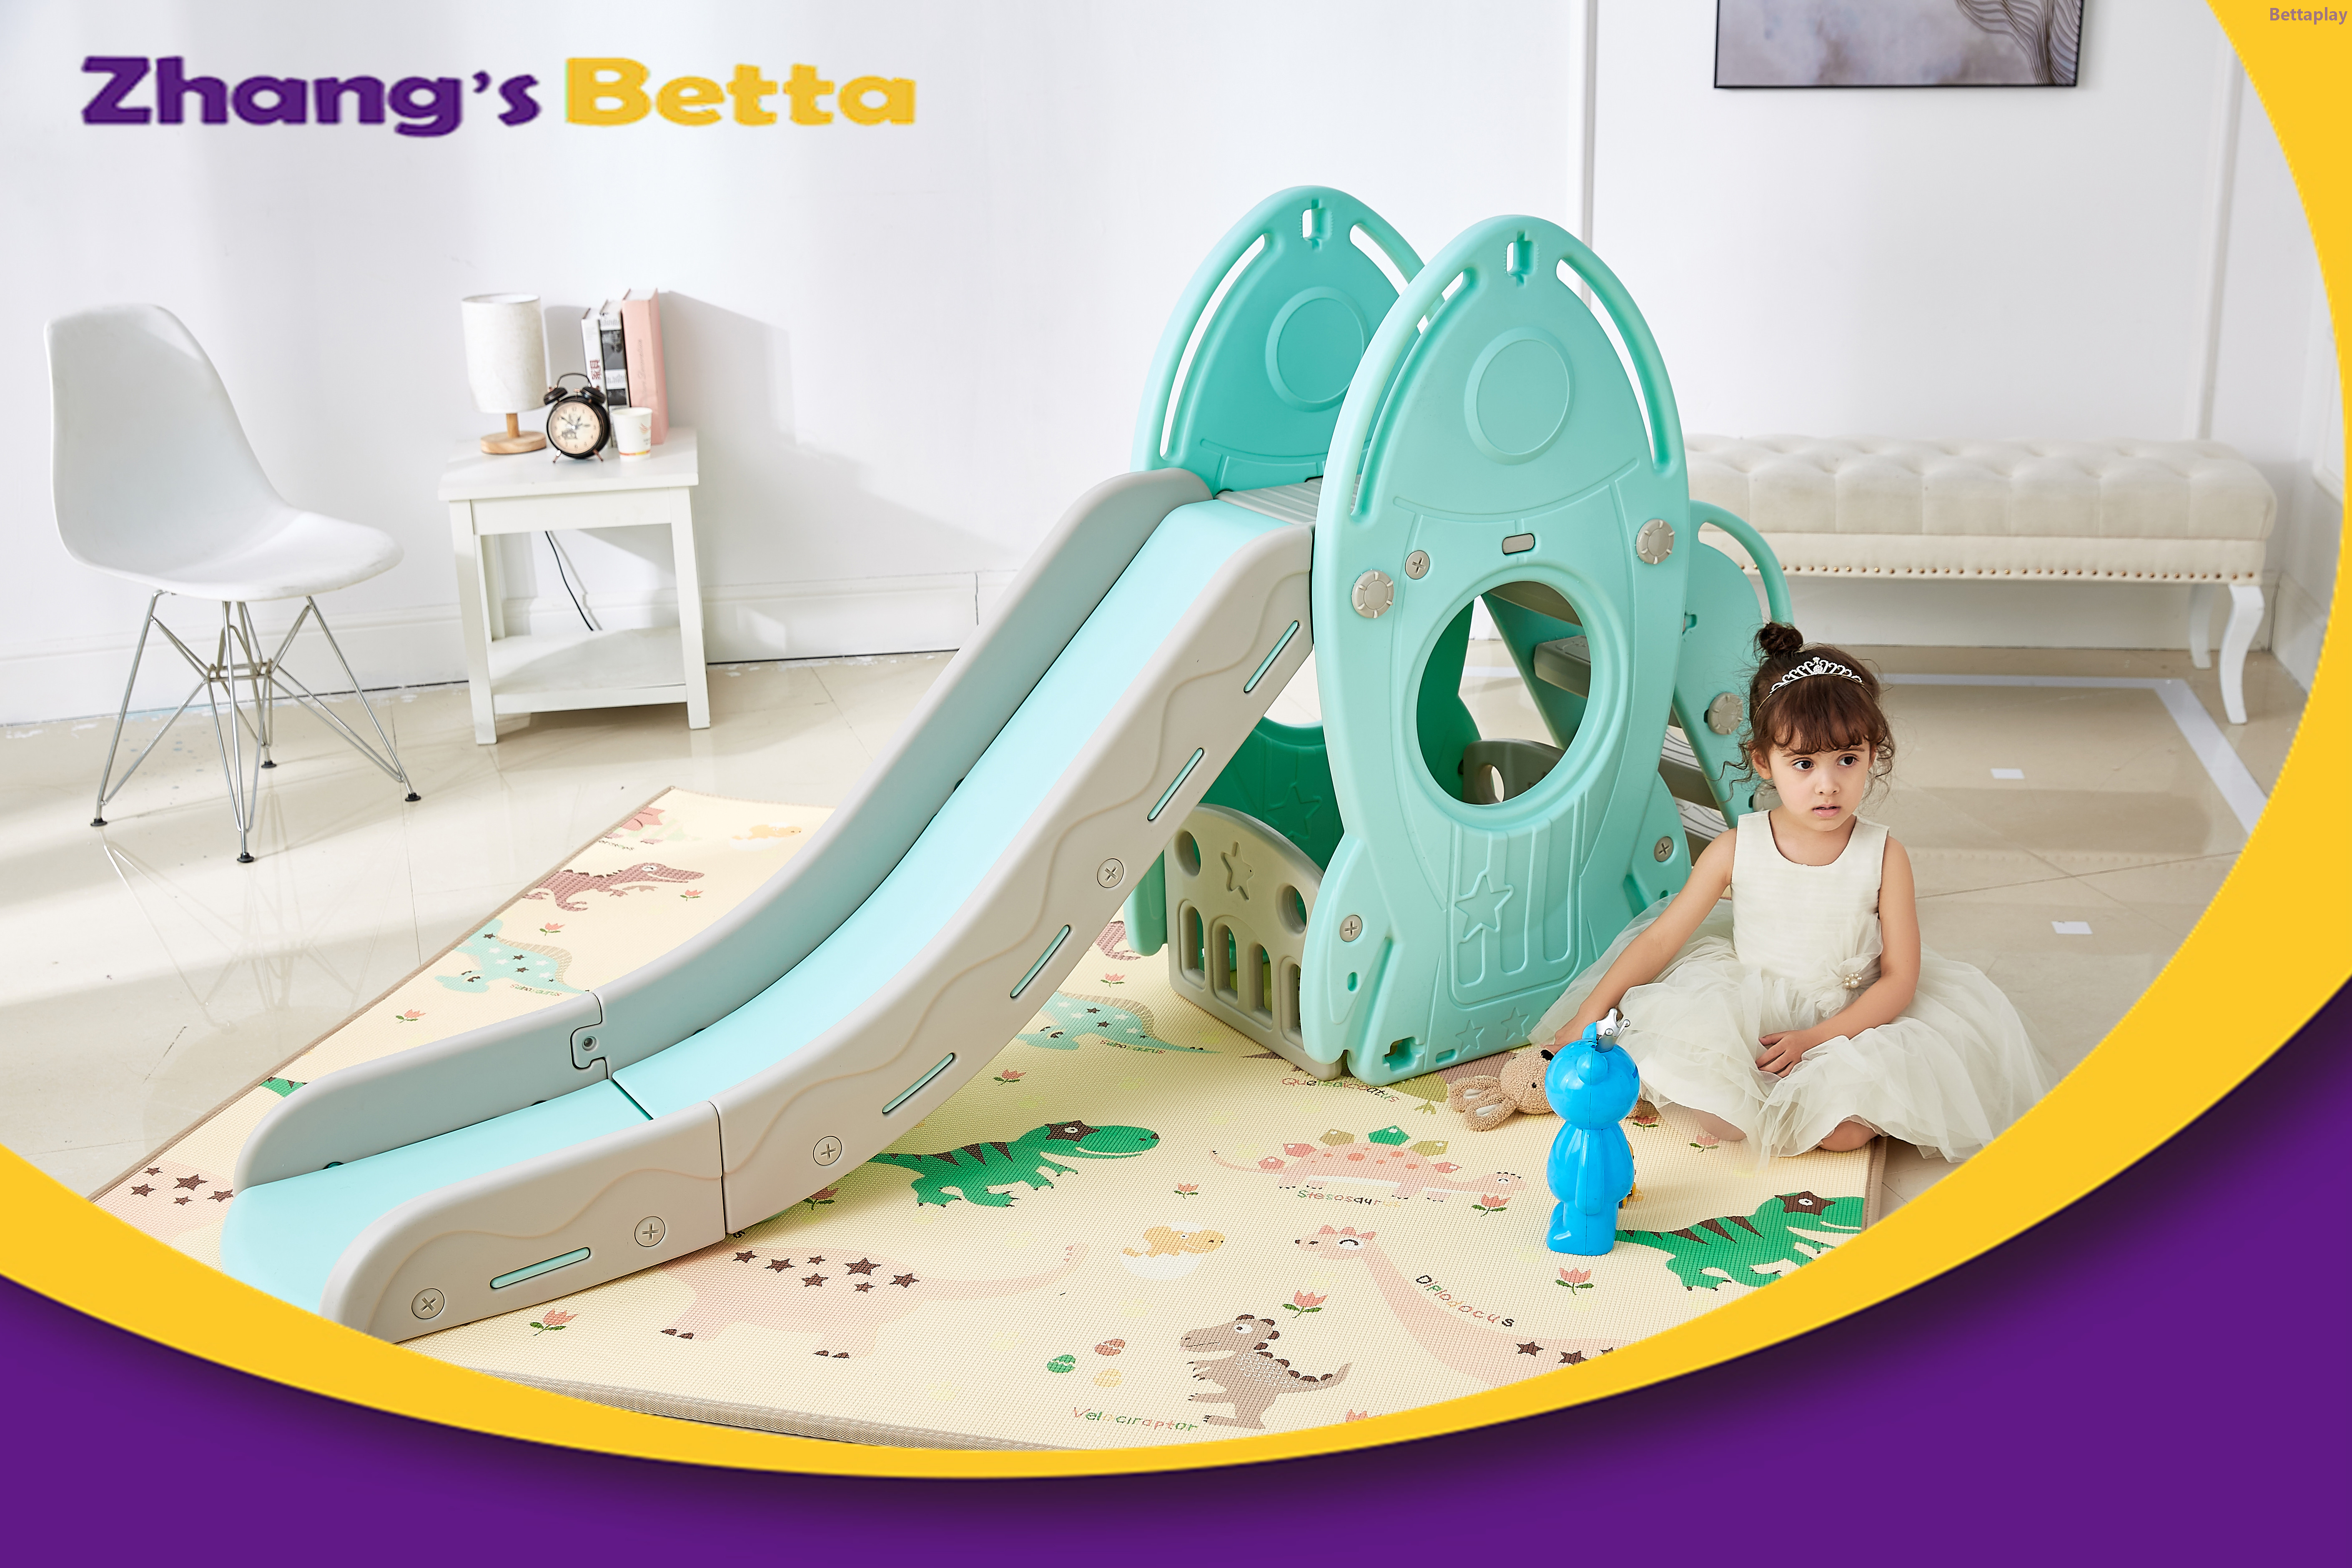 Pastel Home Stay New Design Best Quality & Plastic Children Slide with Hoop Outdoor Playground Equipment Own Use